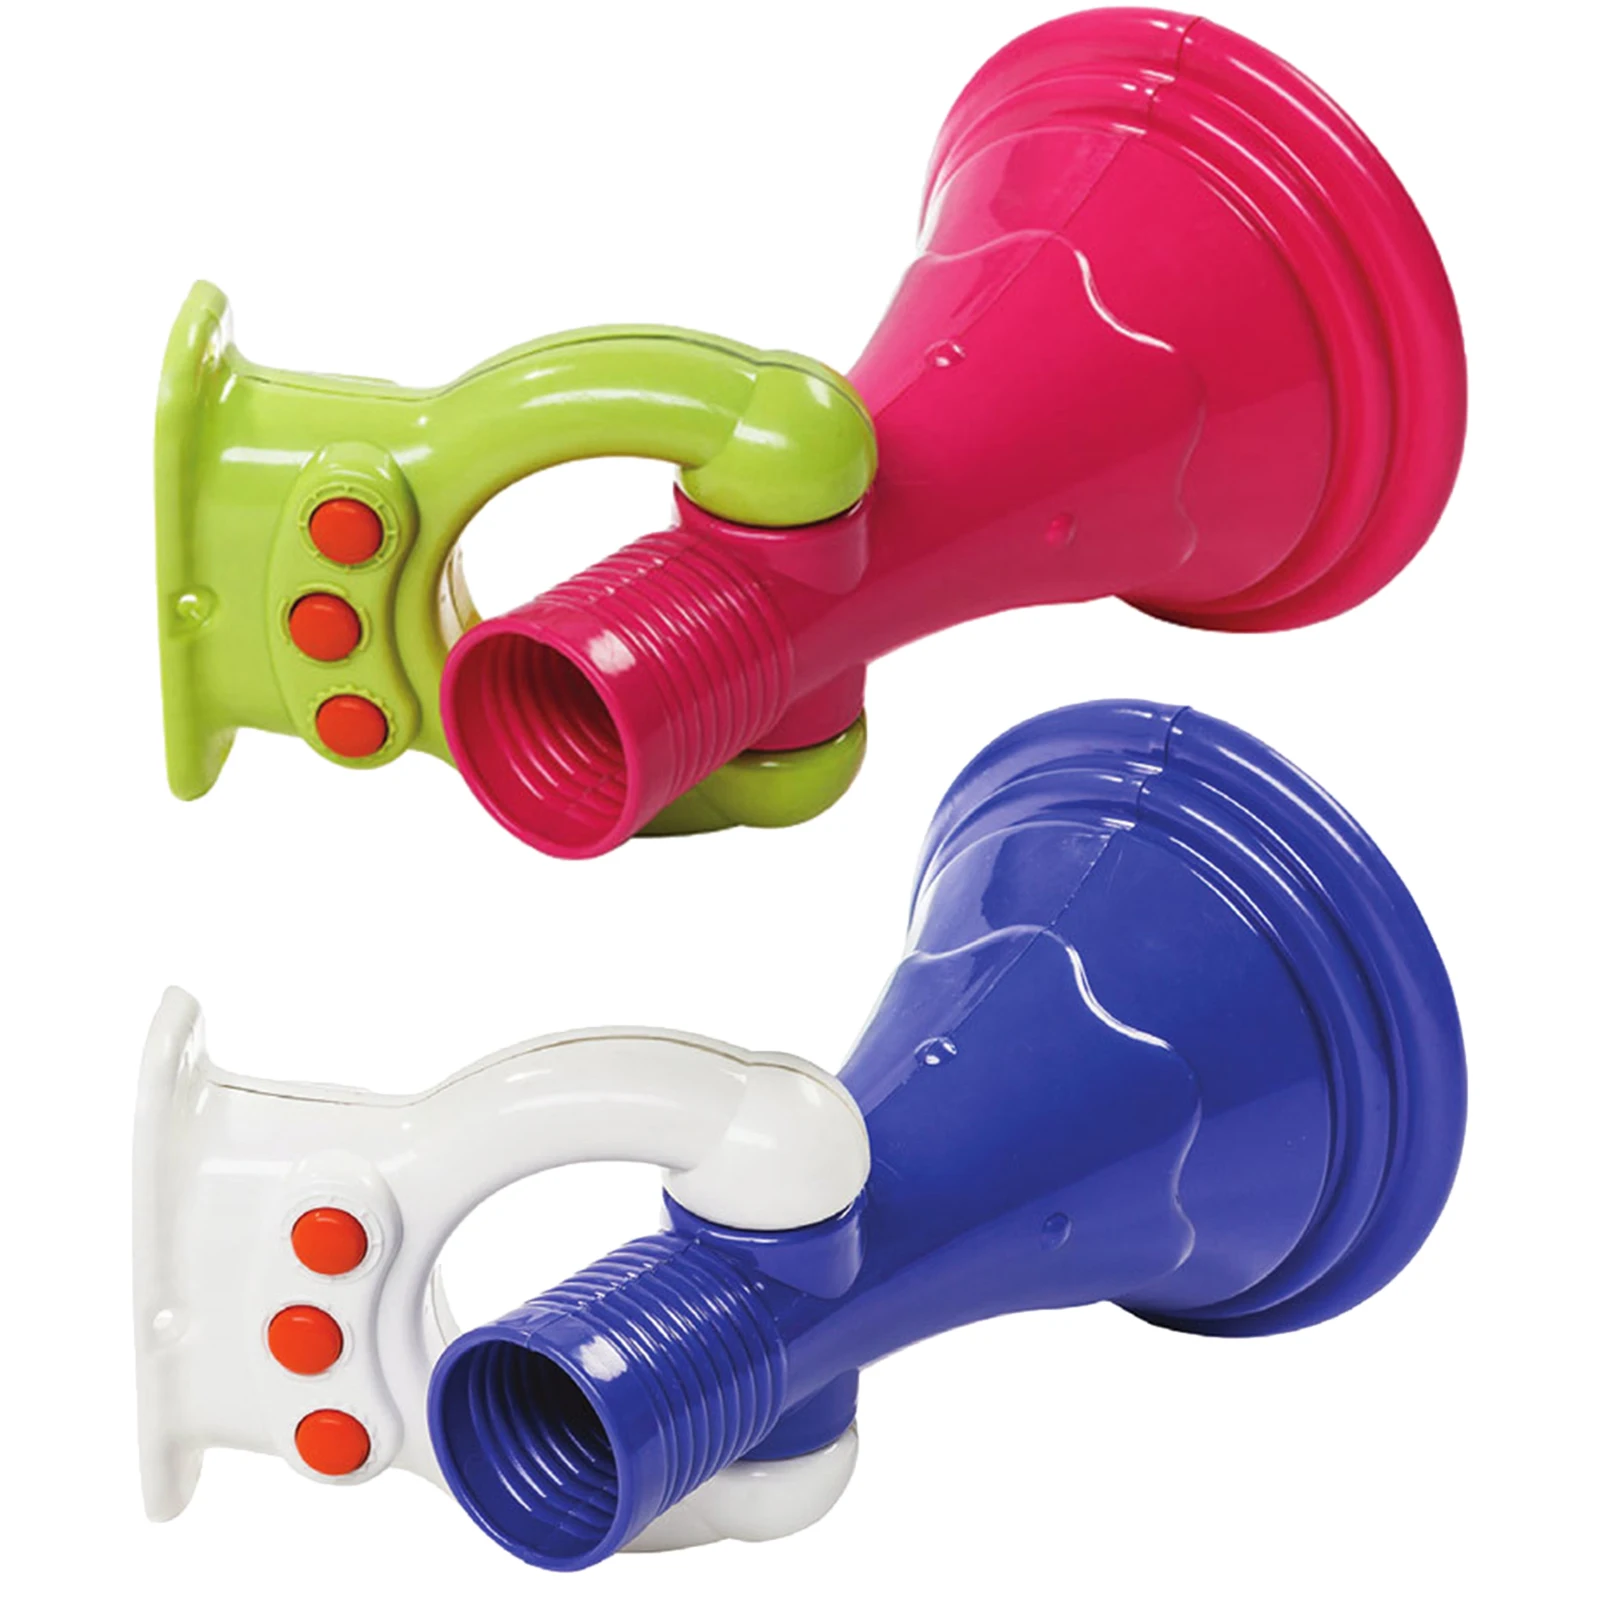 Outdoor Mounting Megaphone Role Play Toy for Playgrounds Slides Fences